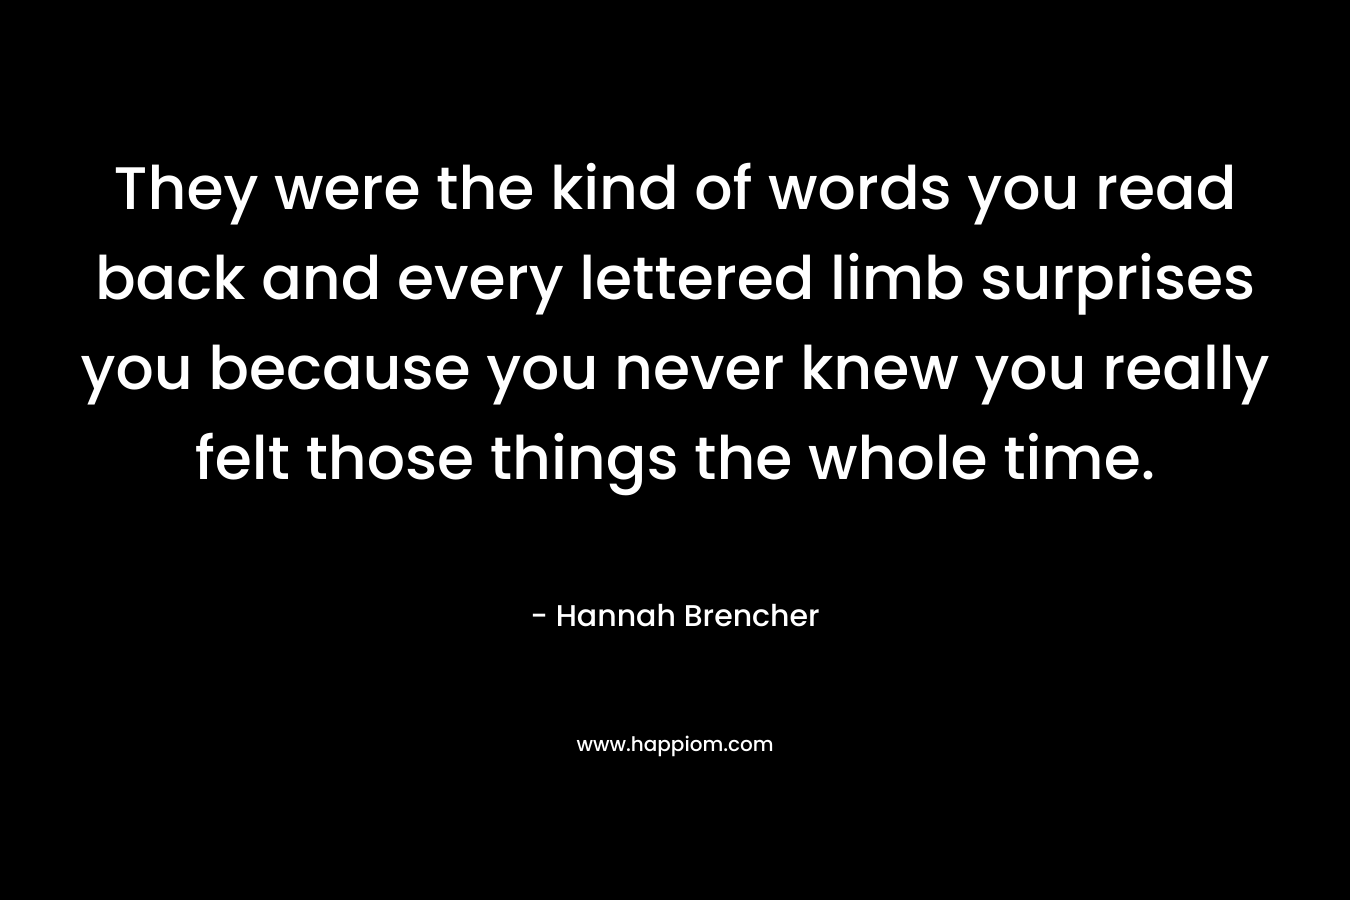 They were the kind of words you read back and every lettered limb surprises you because you never knew you really felt those things the whole time. – Hannah Brencher